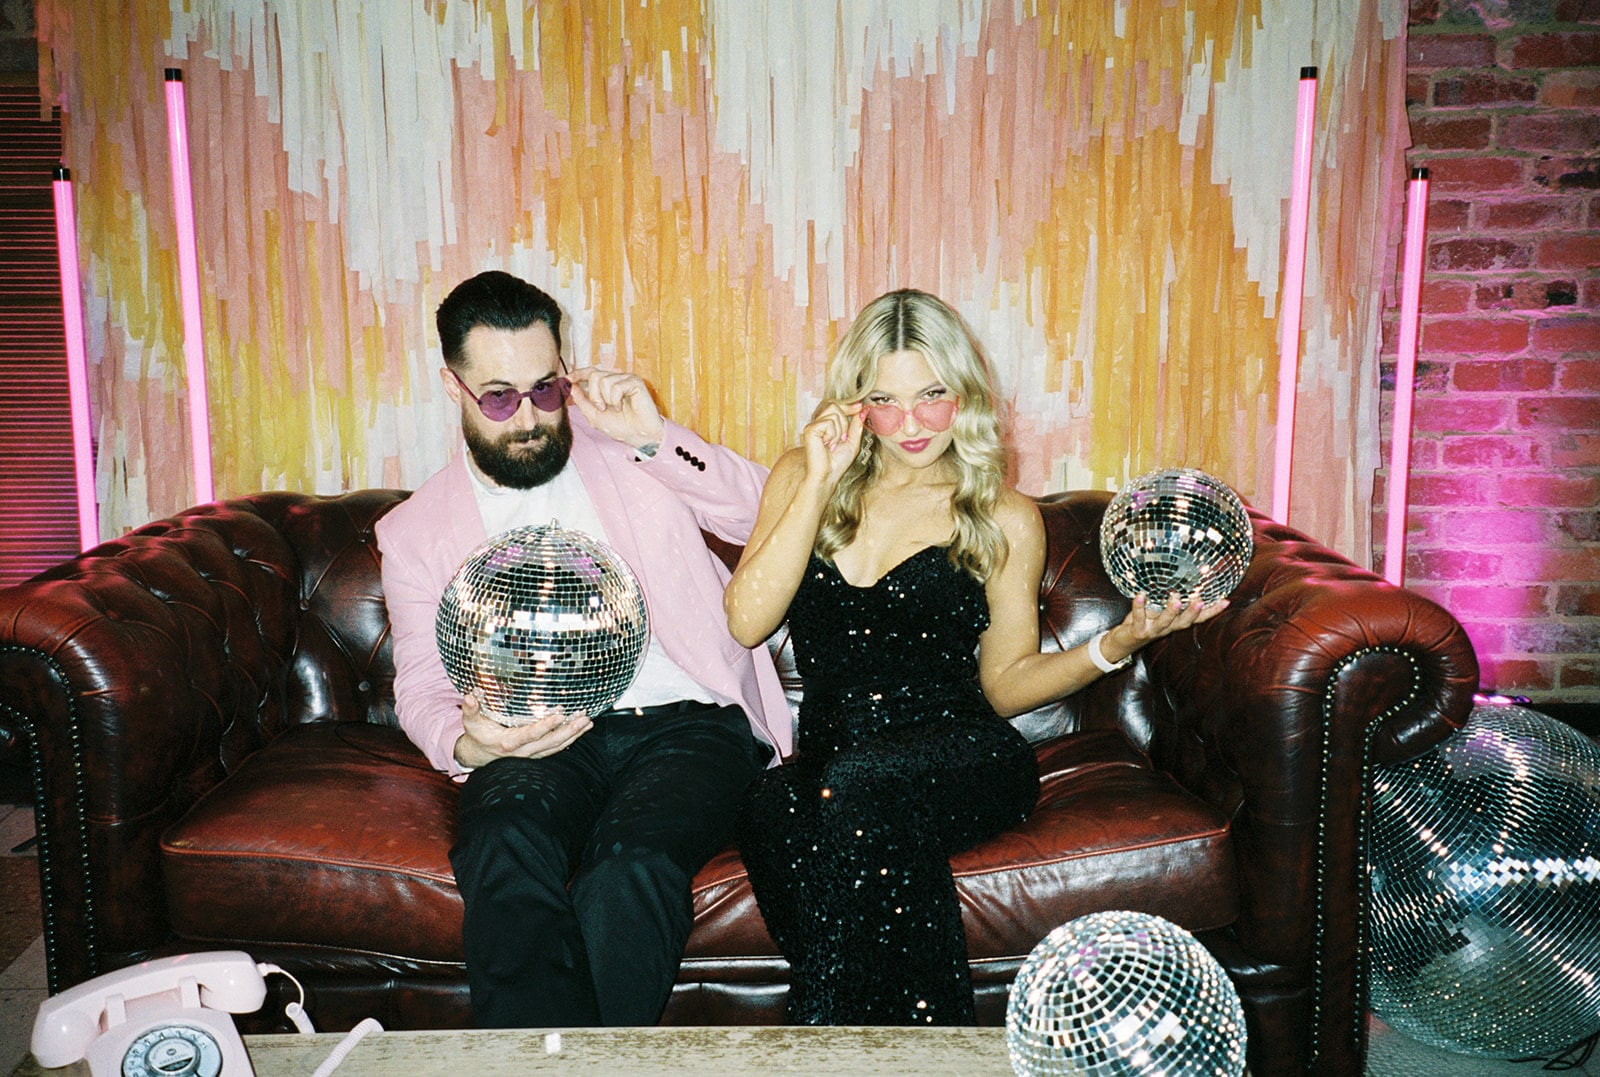 Melbourne Wedding DJs Eddy and Aleks Pose with Disco Balls Photographed by Caity and Duncan